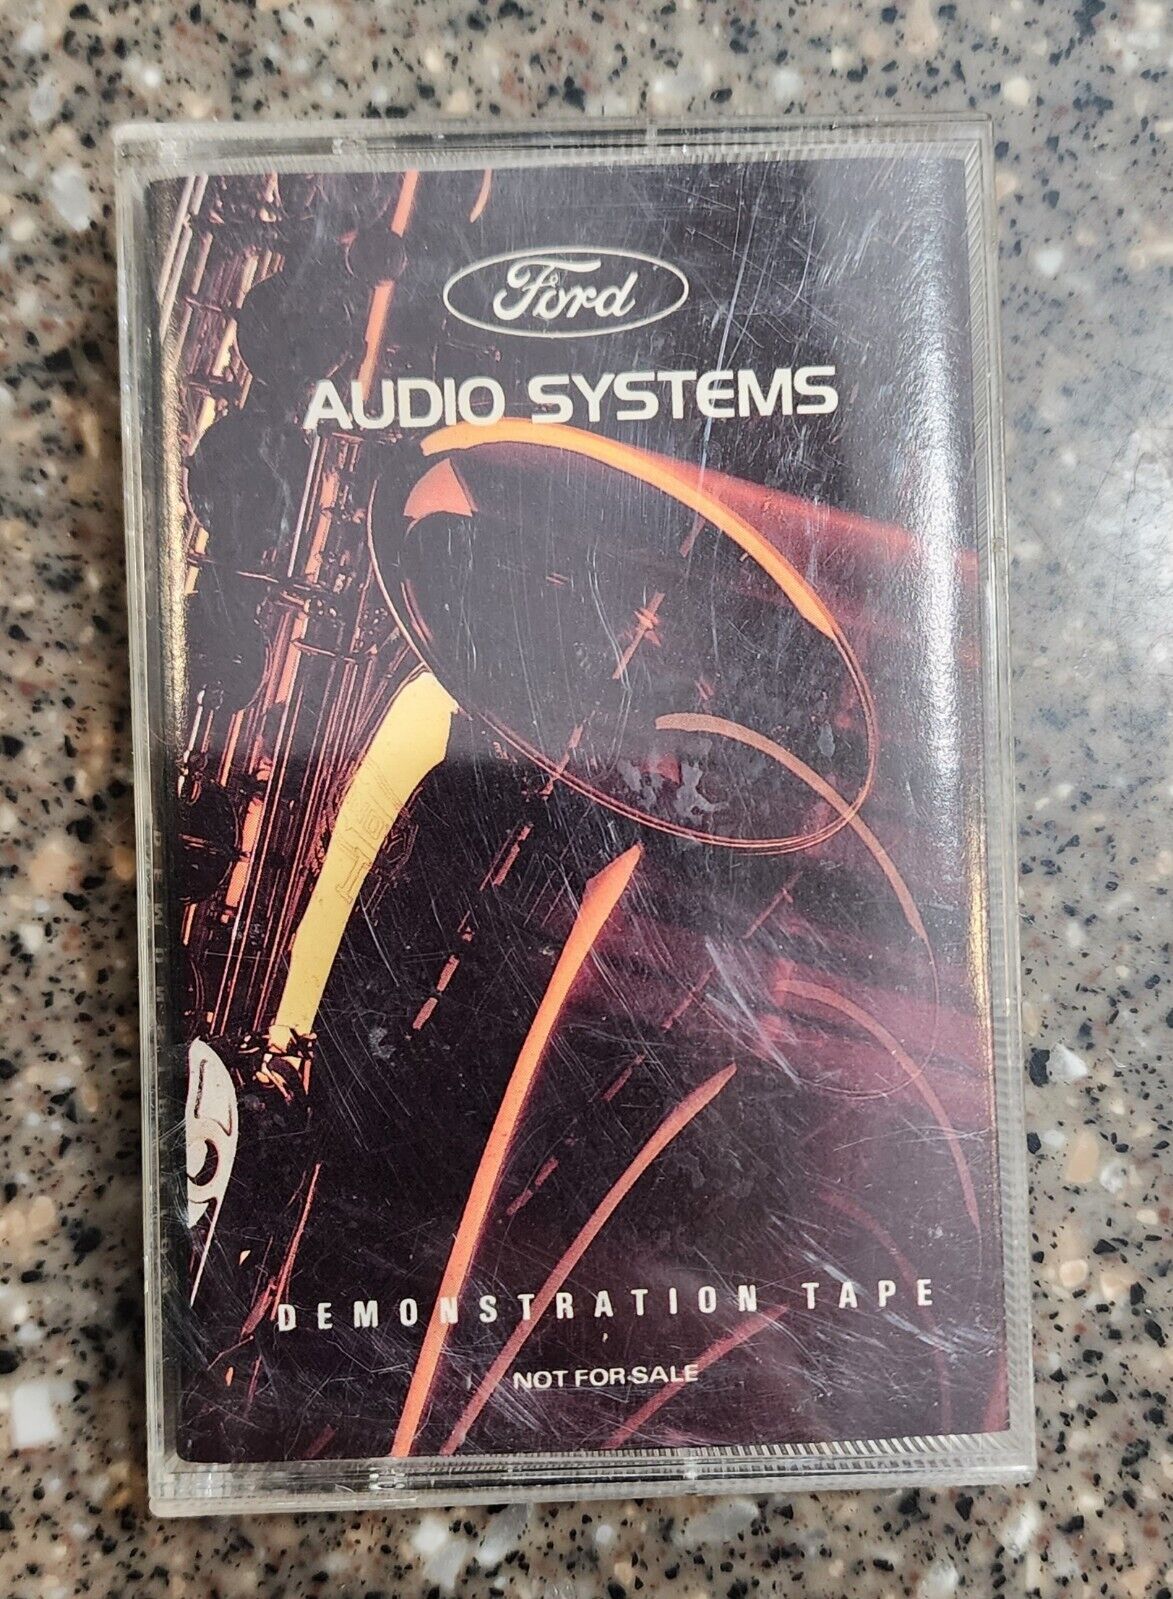 New/Sealed - Vintage Genuine Ford Audio Systems Demonstration Demo Cassette Tape